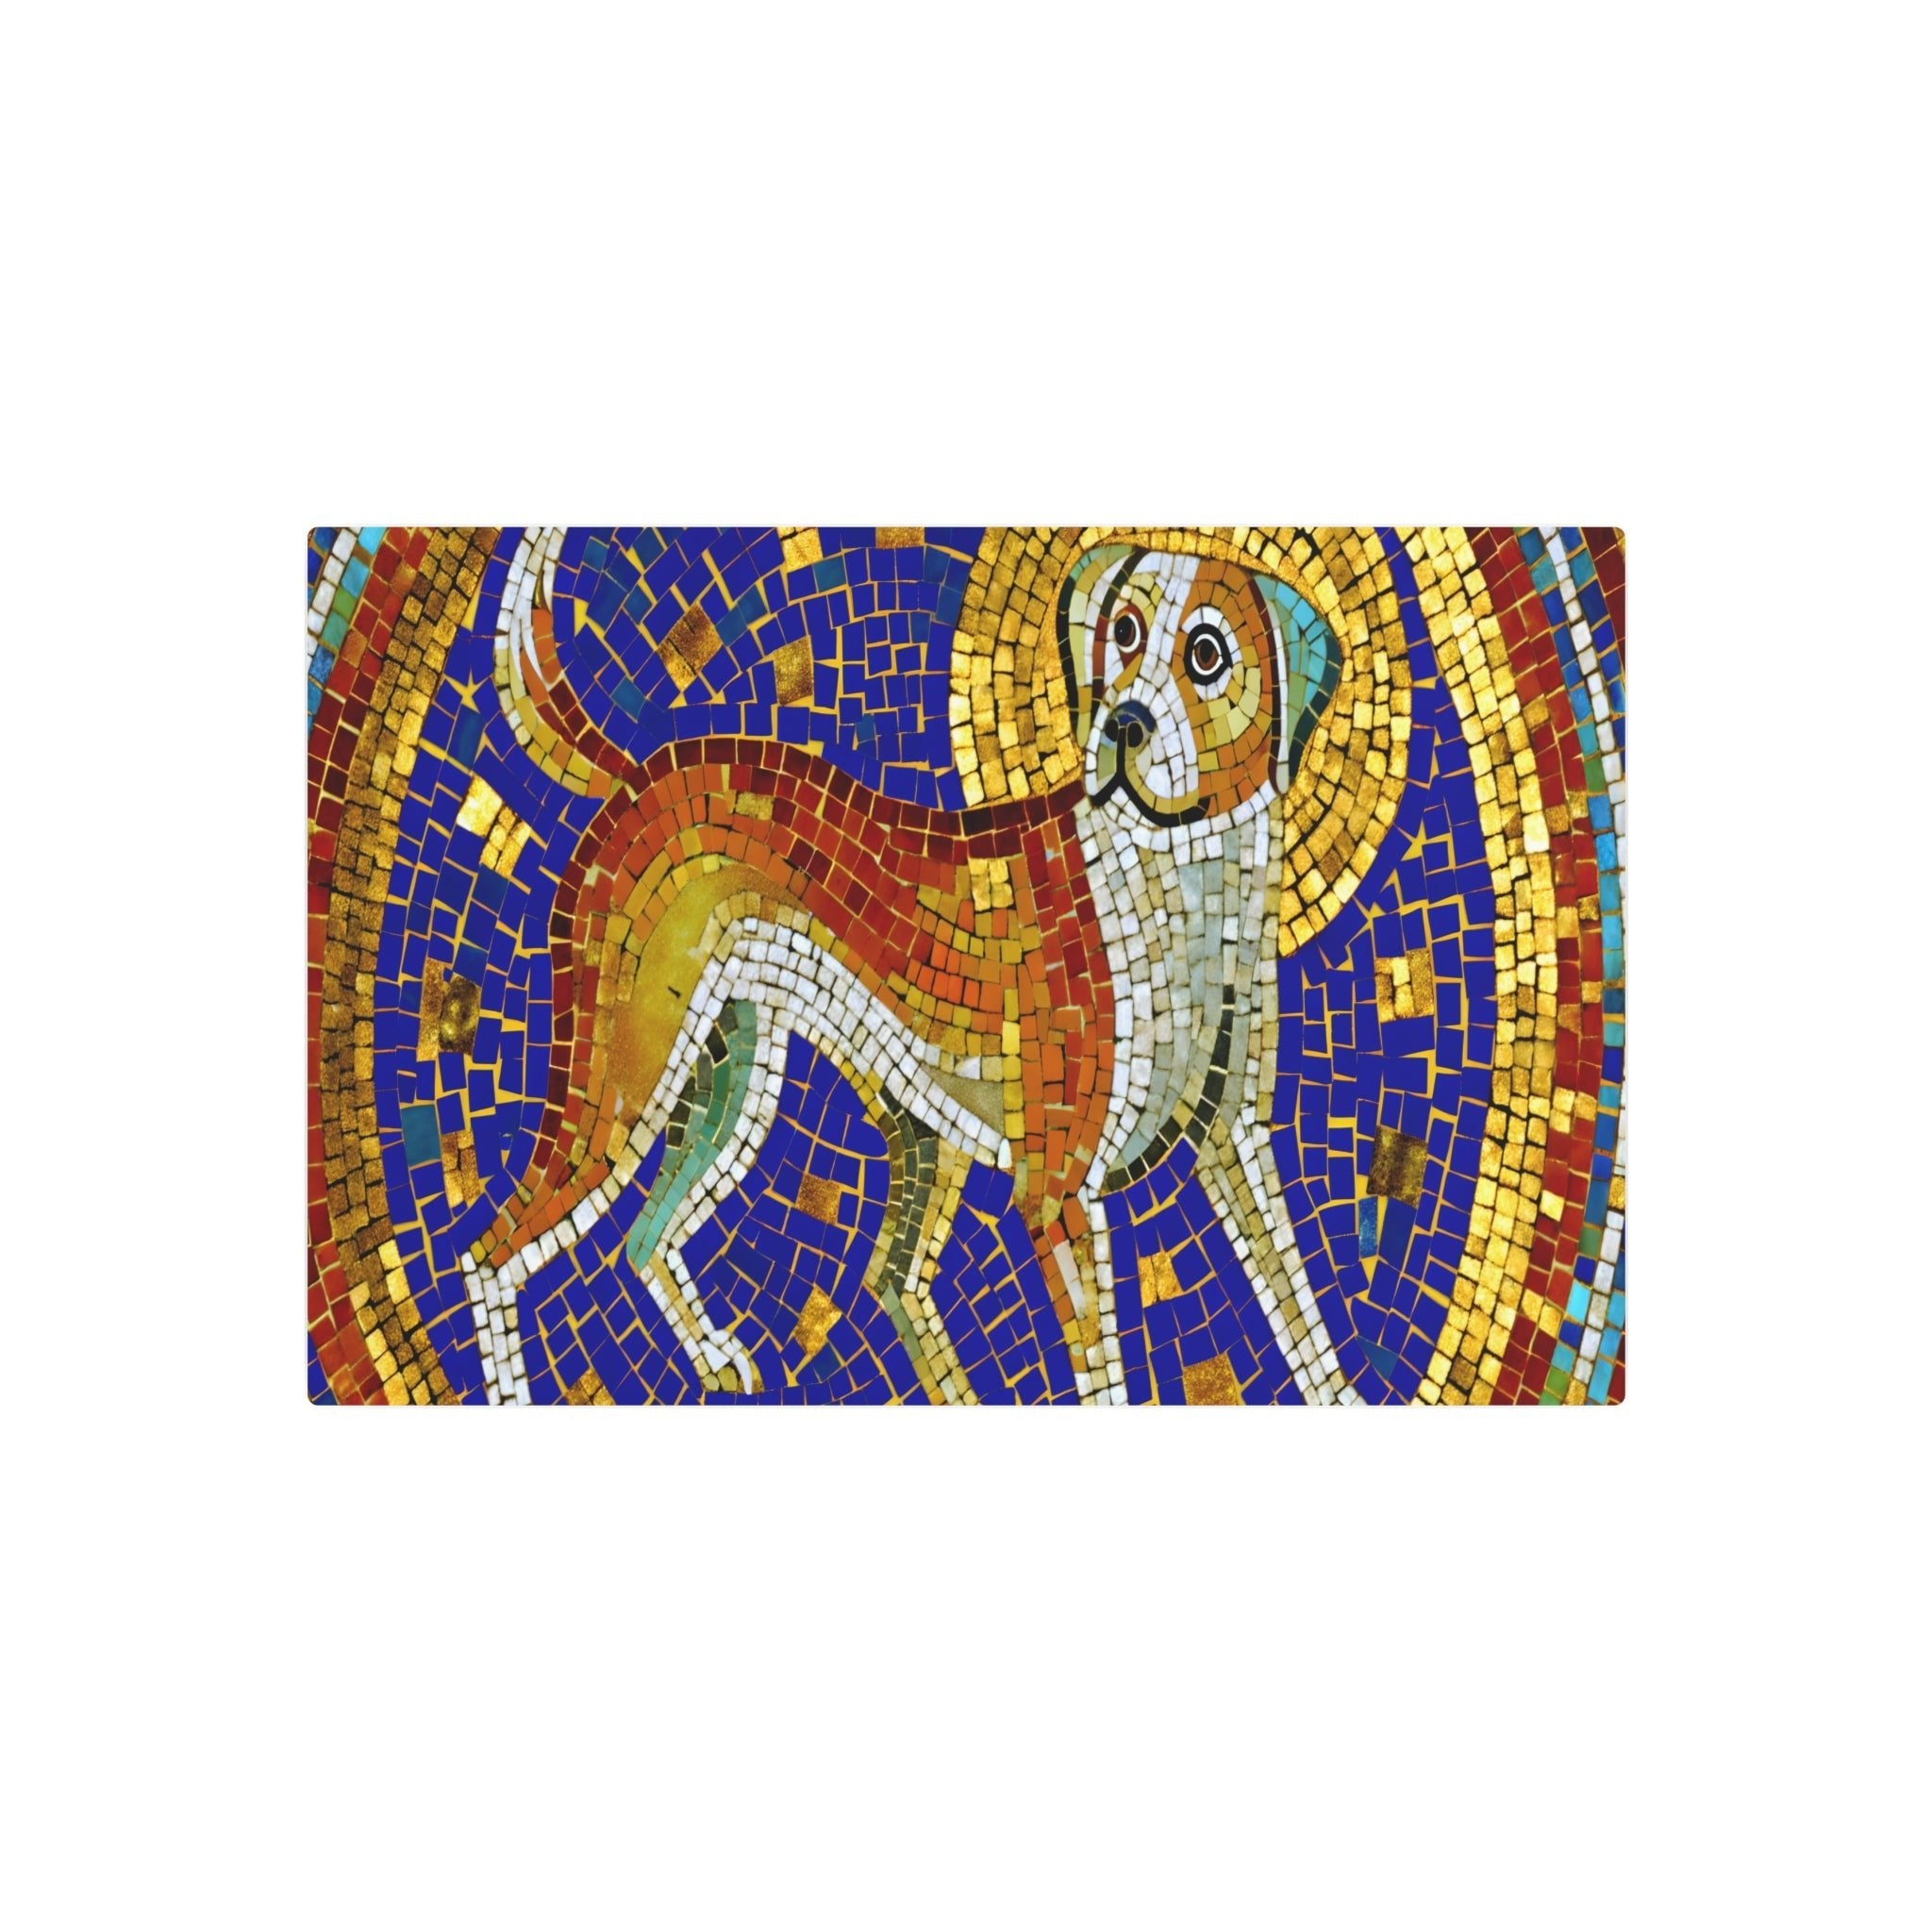 Metal Poster Art | "Byzantine Style Dog Art - Vibrant and Detailed Non-Western Global Art in Gold Accents & Mosaics" - Metal Poster Art 30″ x 20″ (Horizontal) 0.12''